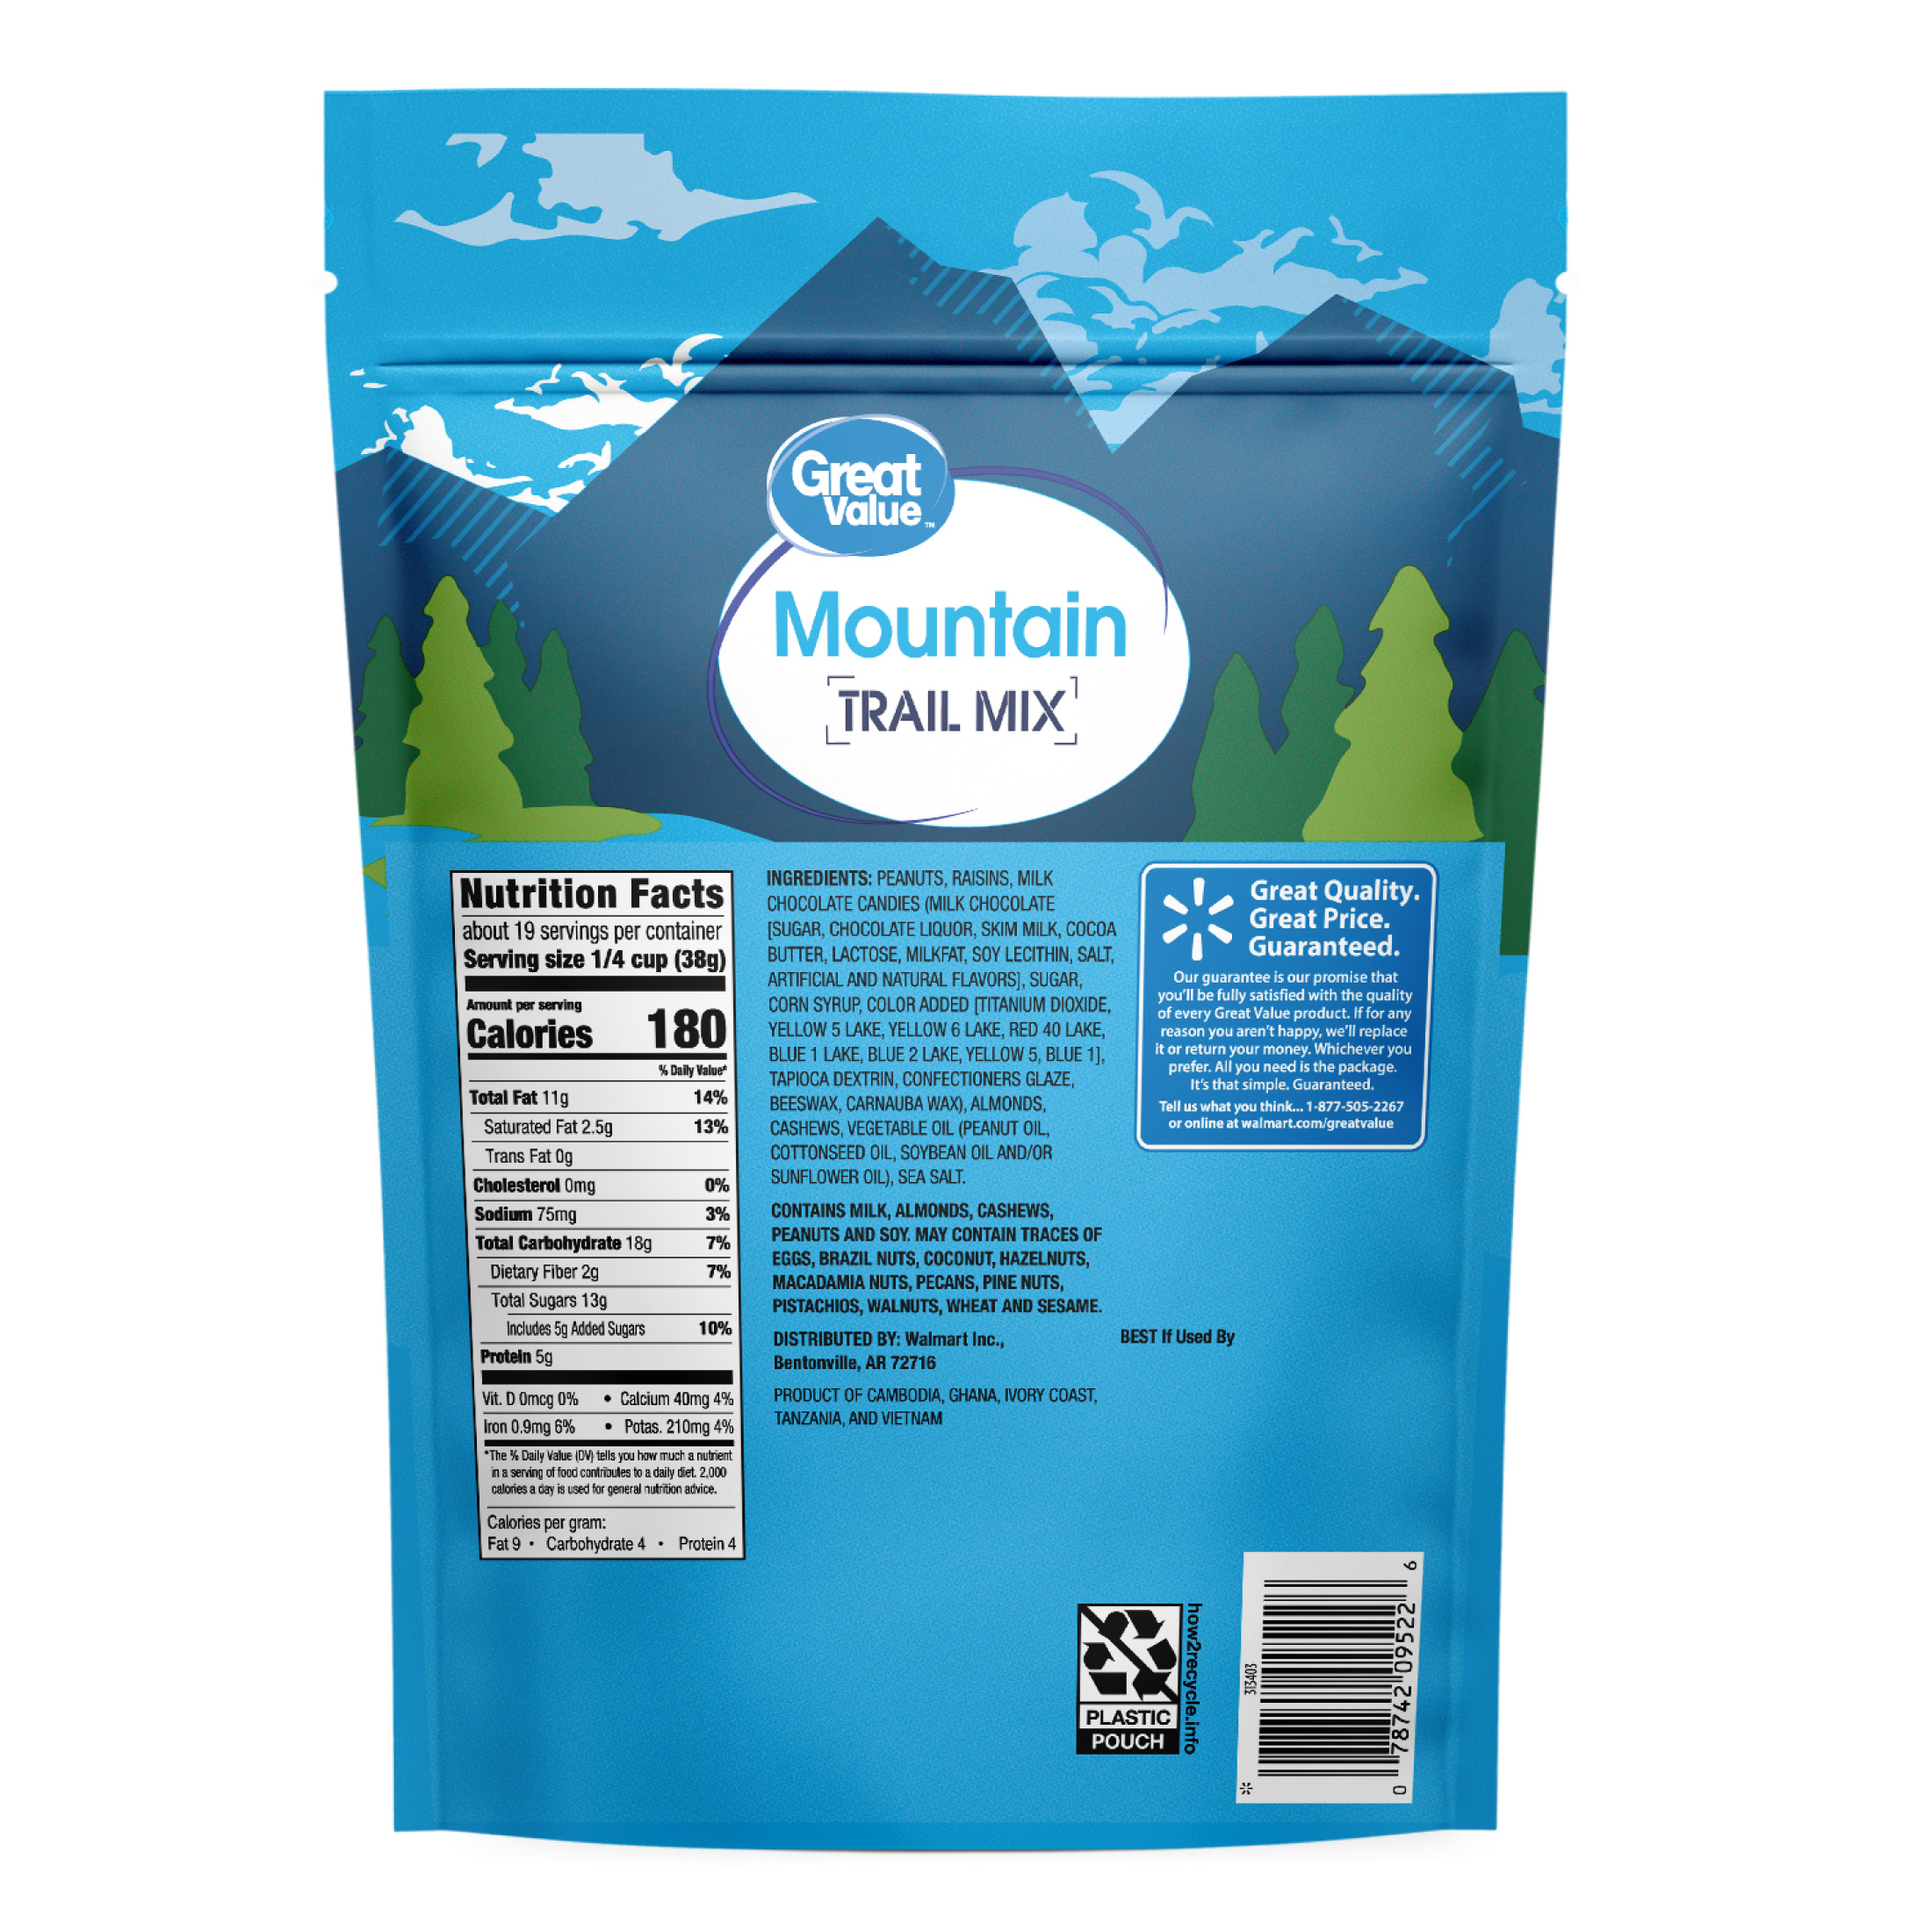 Great Value Mountain Trail Mix, 26 oz - image 2 of 6